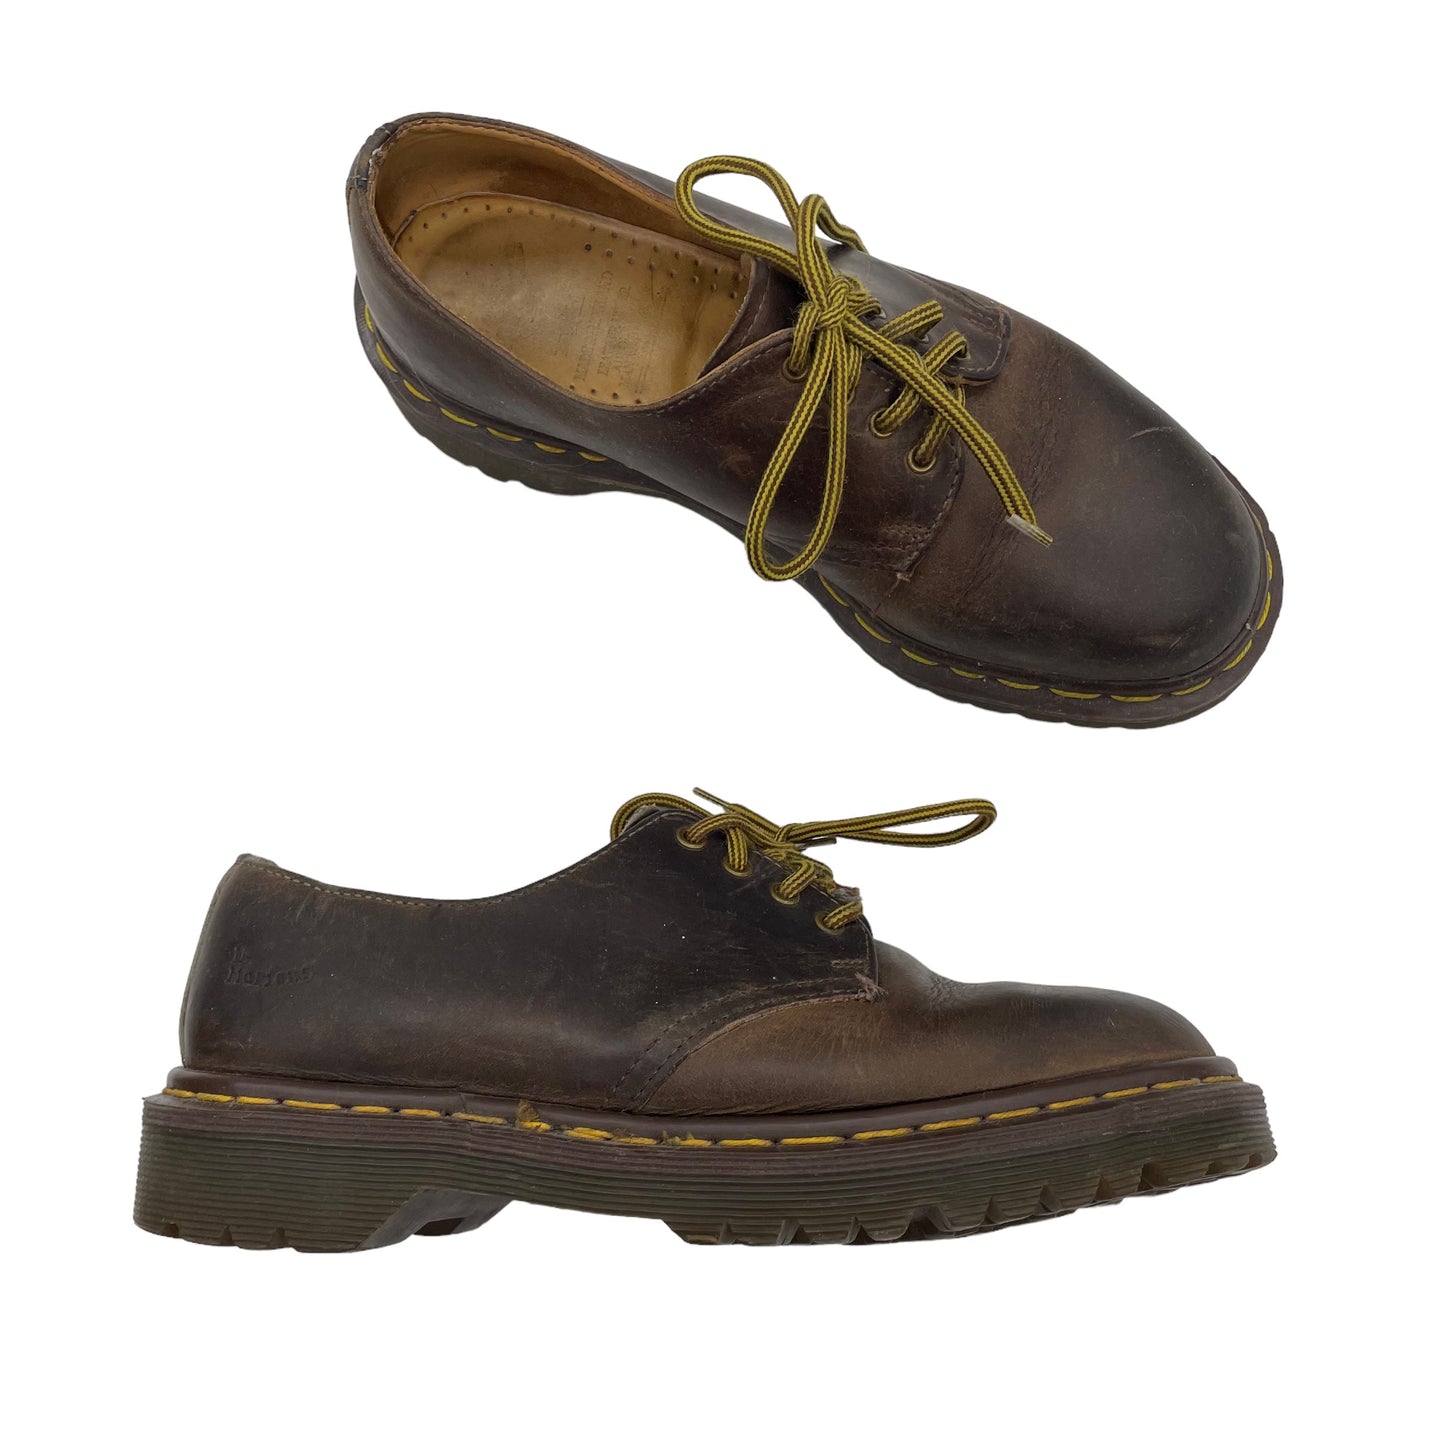 Shoes Flats Loafer Oxford By Dr Martens  Size: 7